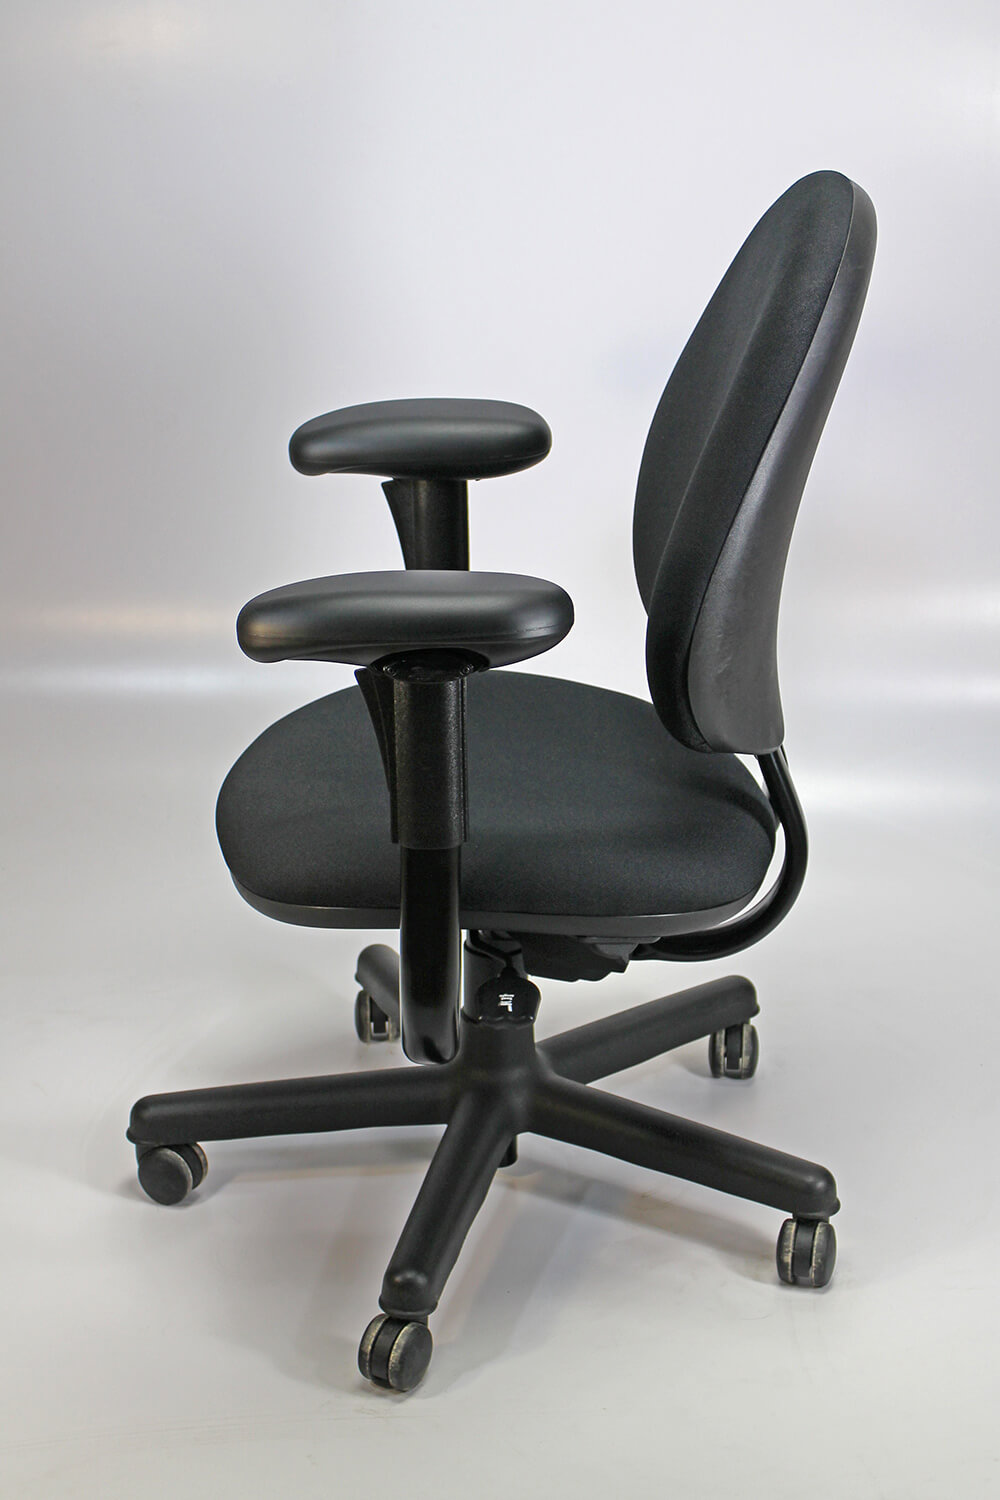 Steelcase criterion chair side view